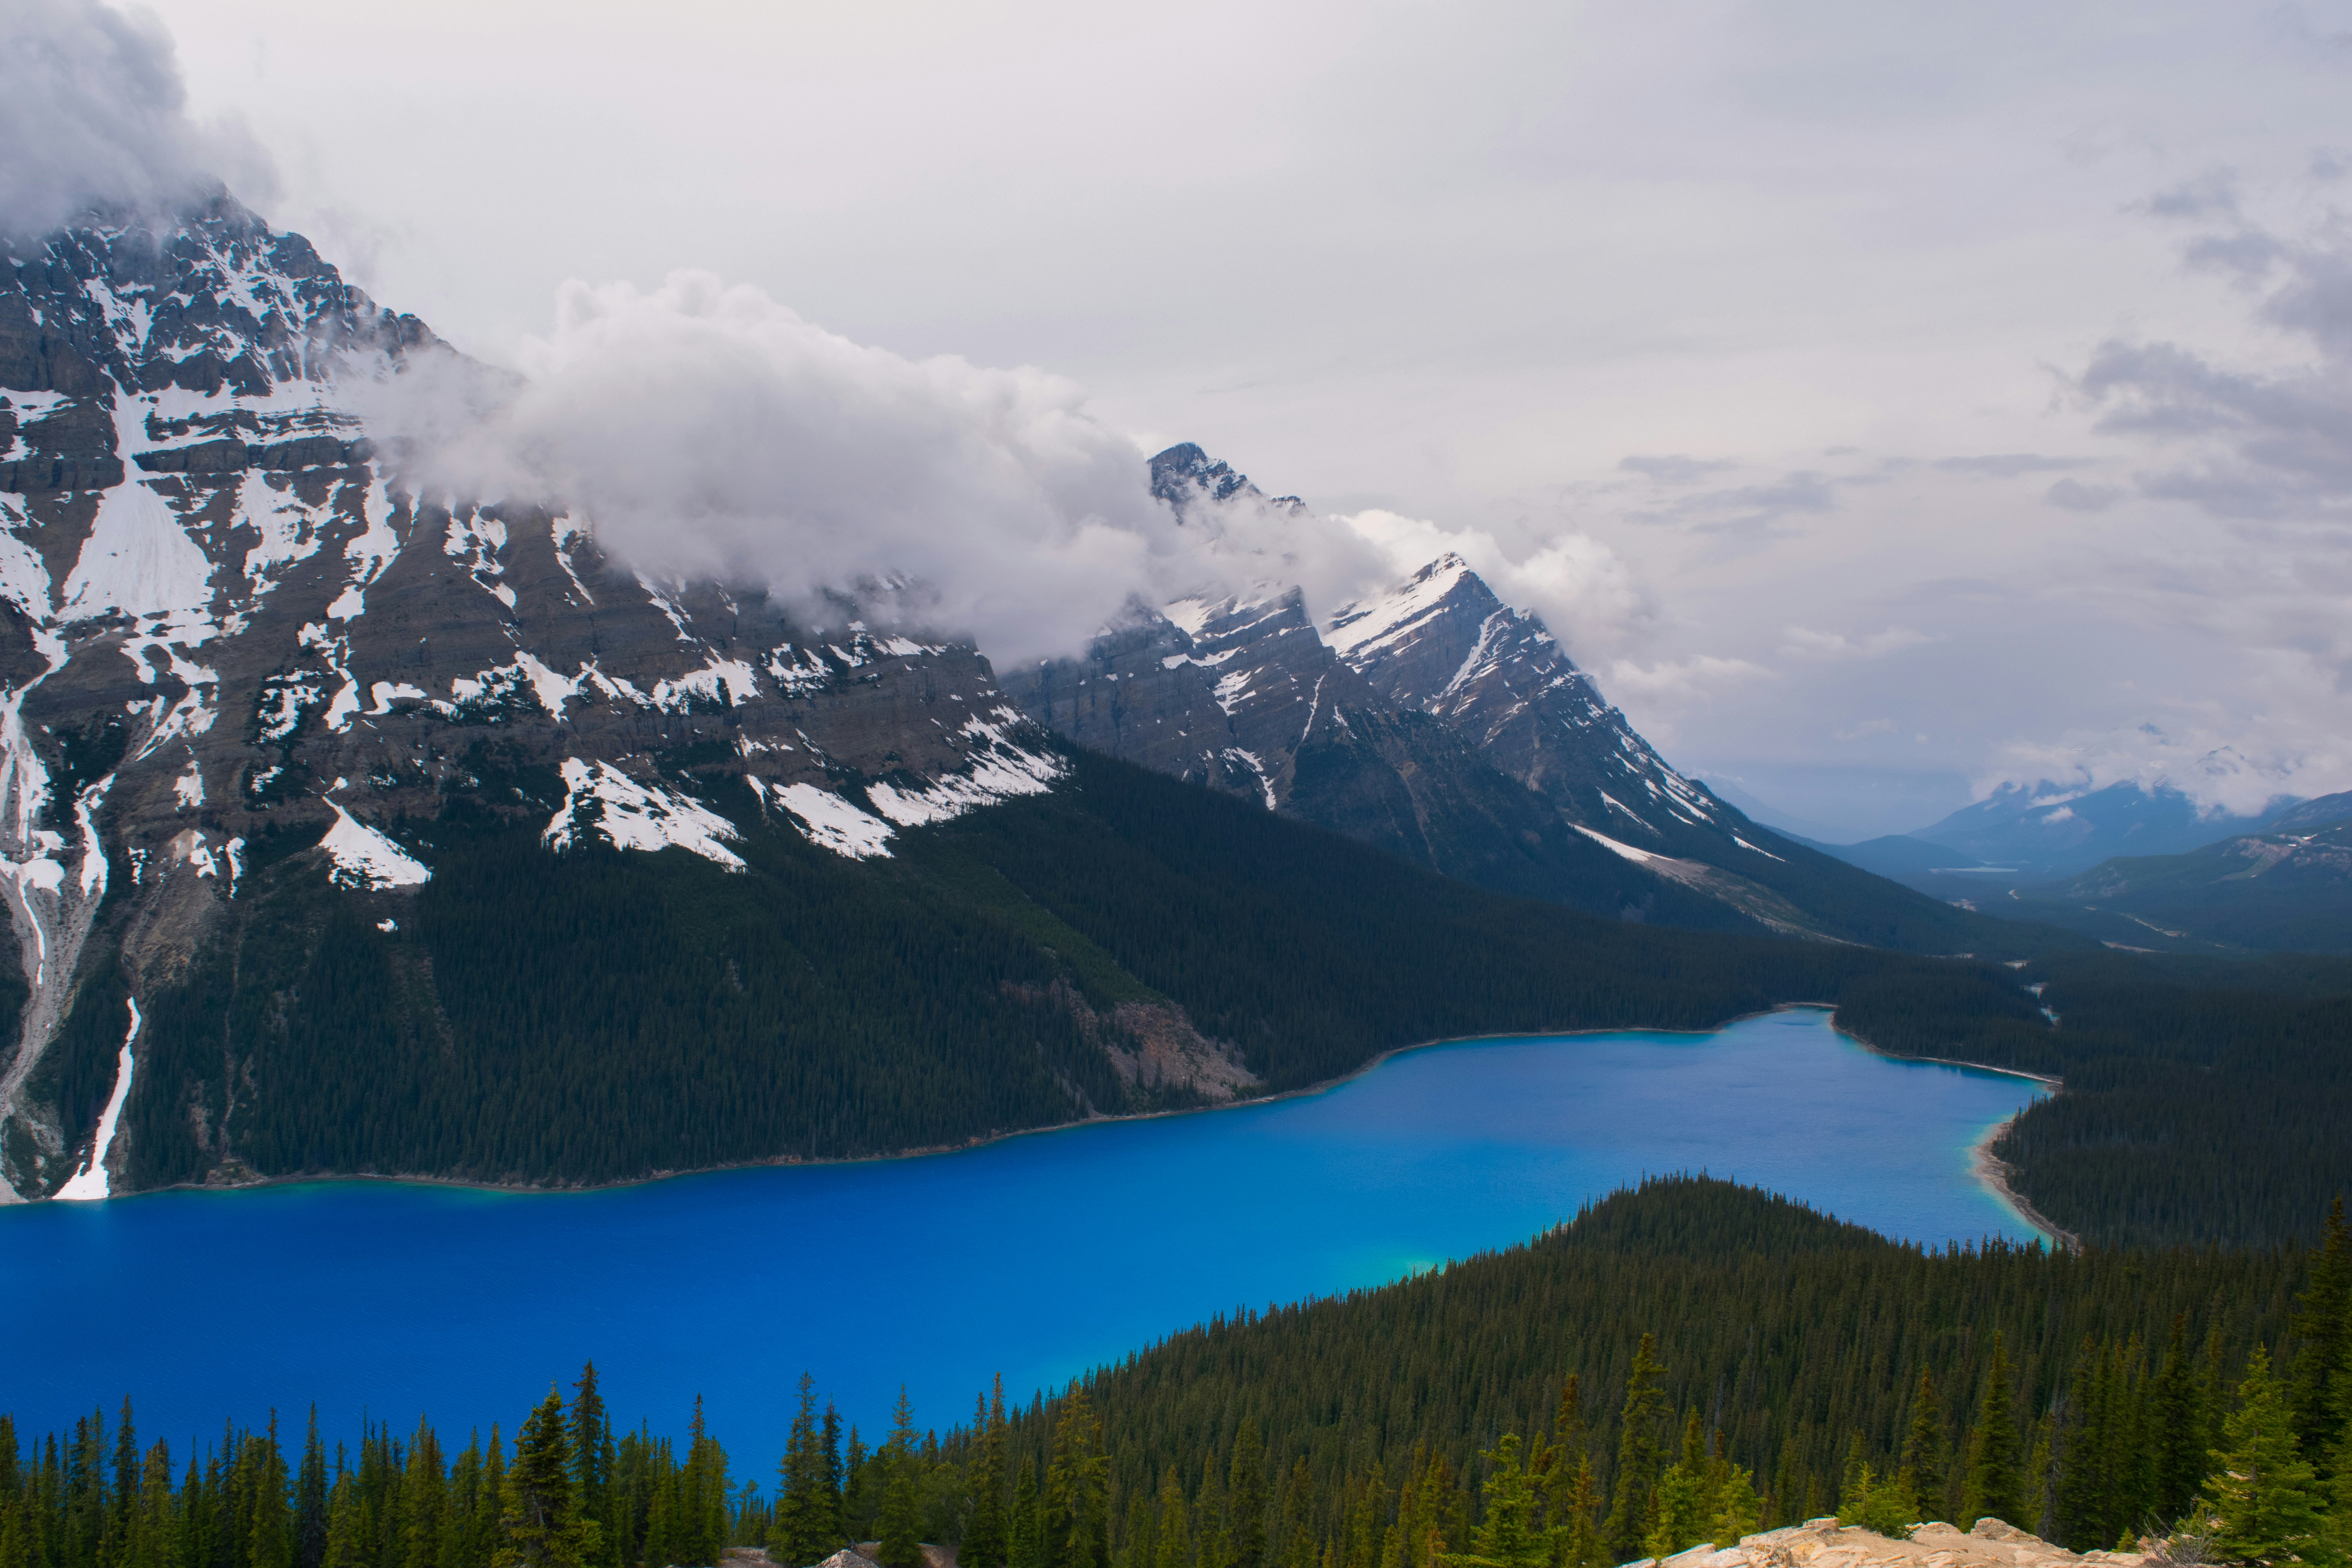 landscape photography of lake and mountain canyon